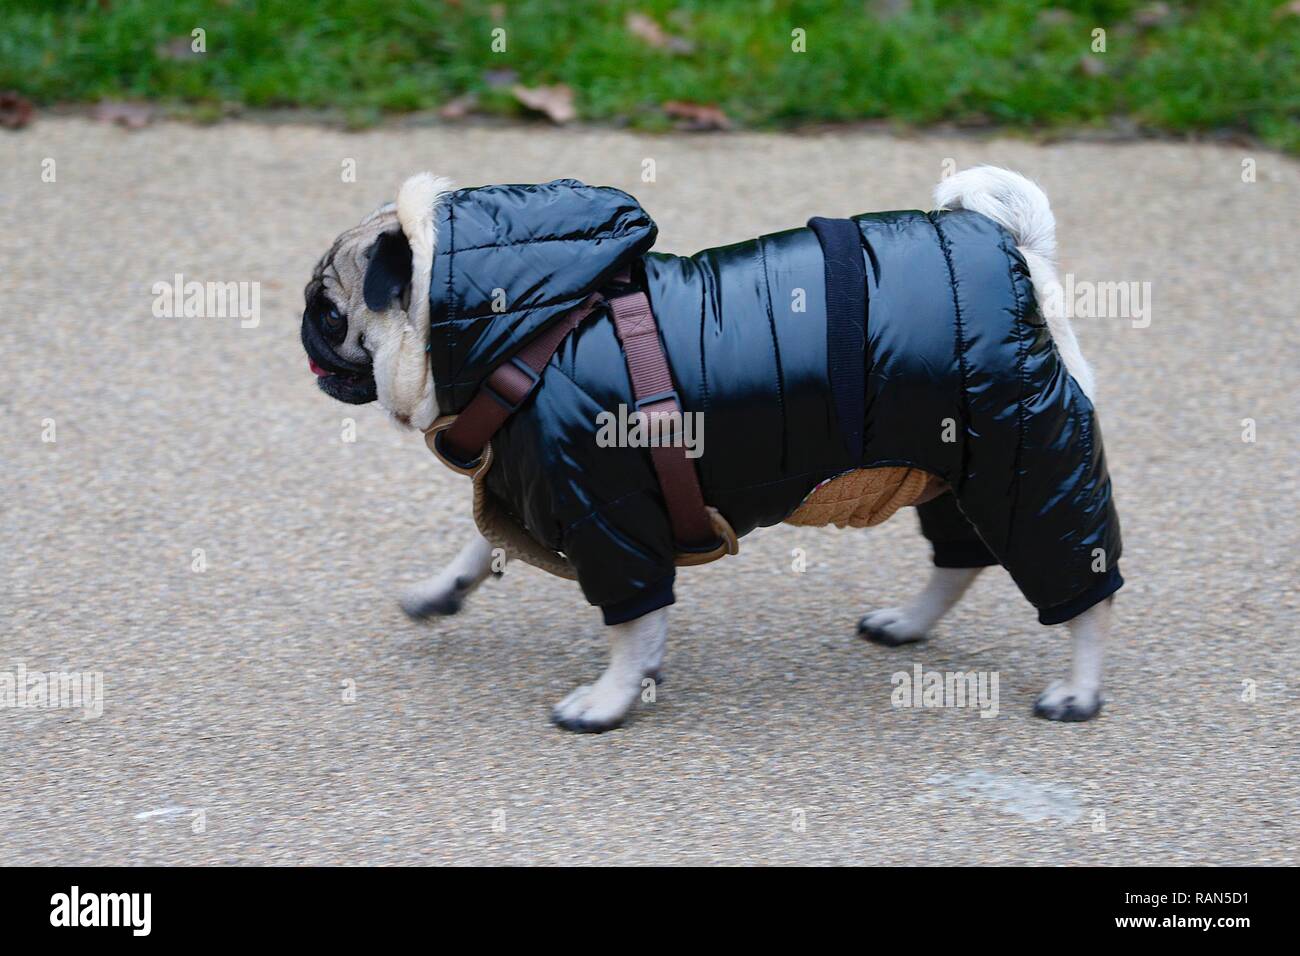 Hastings, East Sussex, UK. 05 Jan, 2019. UK Weather: A chilly start to the morning in Alexandra park in Hastings, East Sussex. This pug dog is wrapped up warm for the cold weather. © Paul Lawrenson 2018, Photo Credit: Paul Lawrenson / Alamy Live News Stock Photo